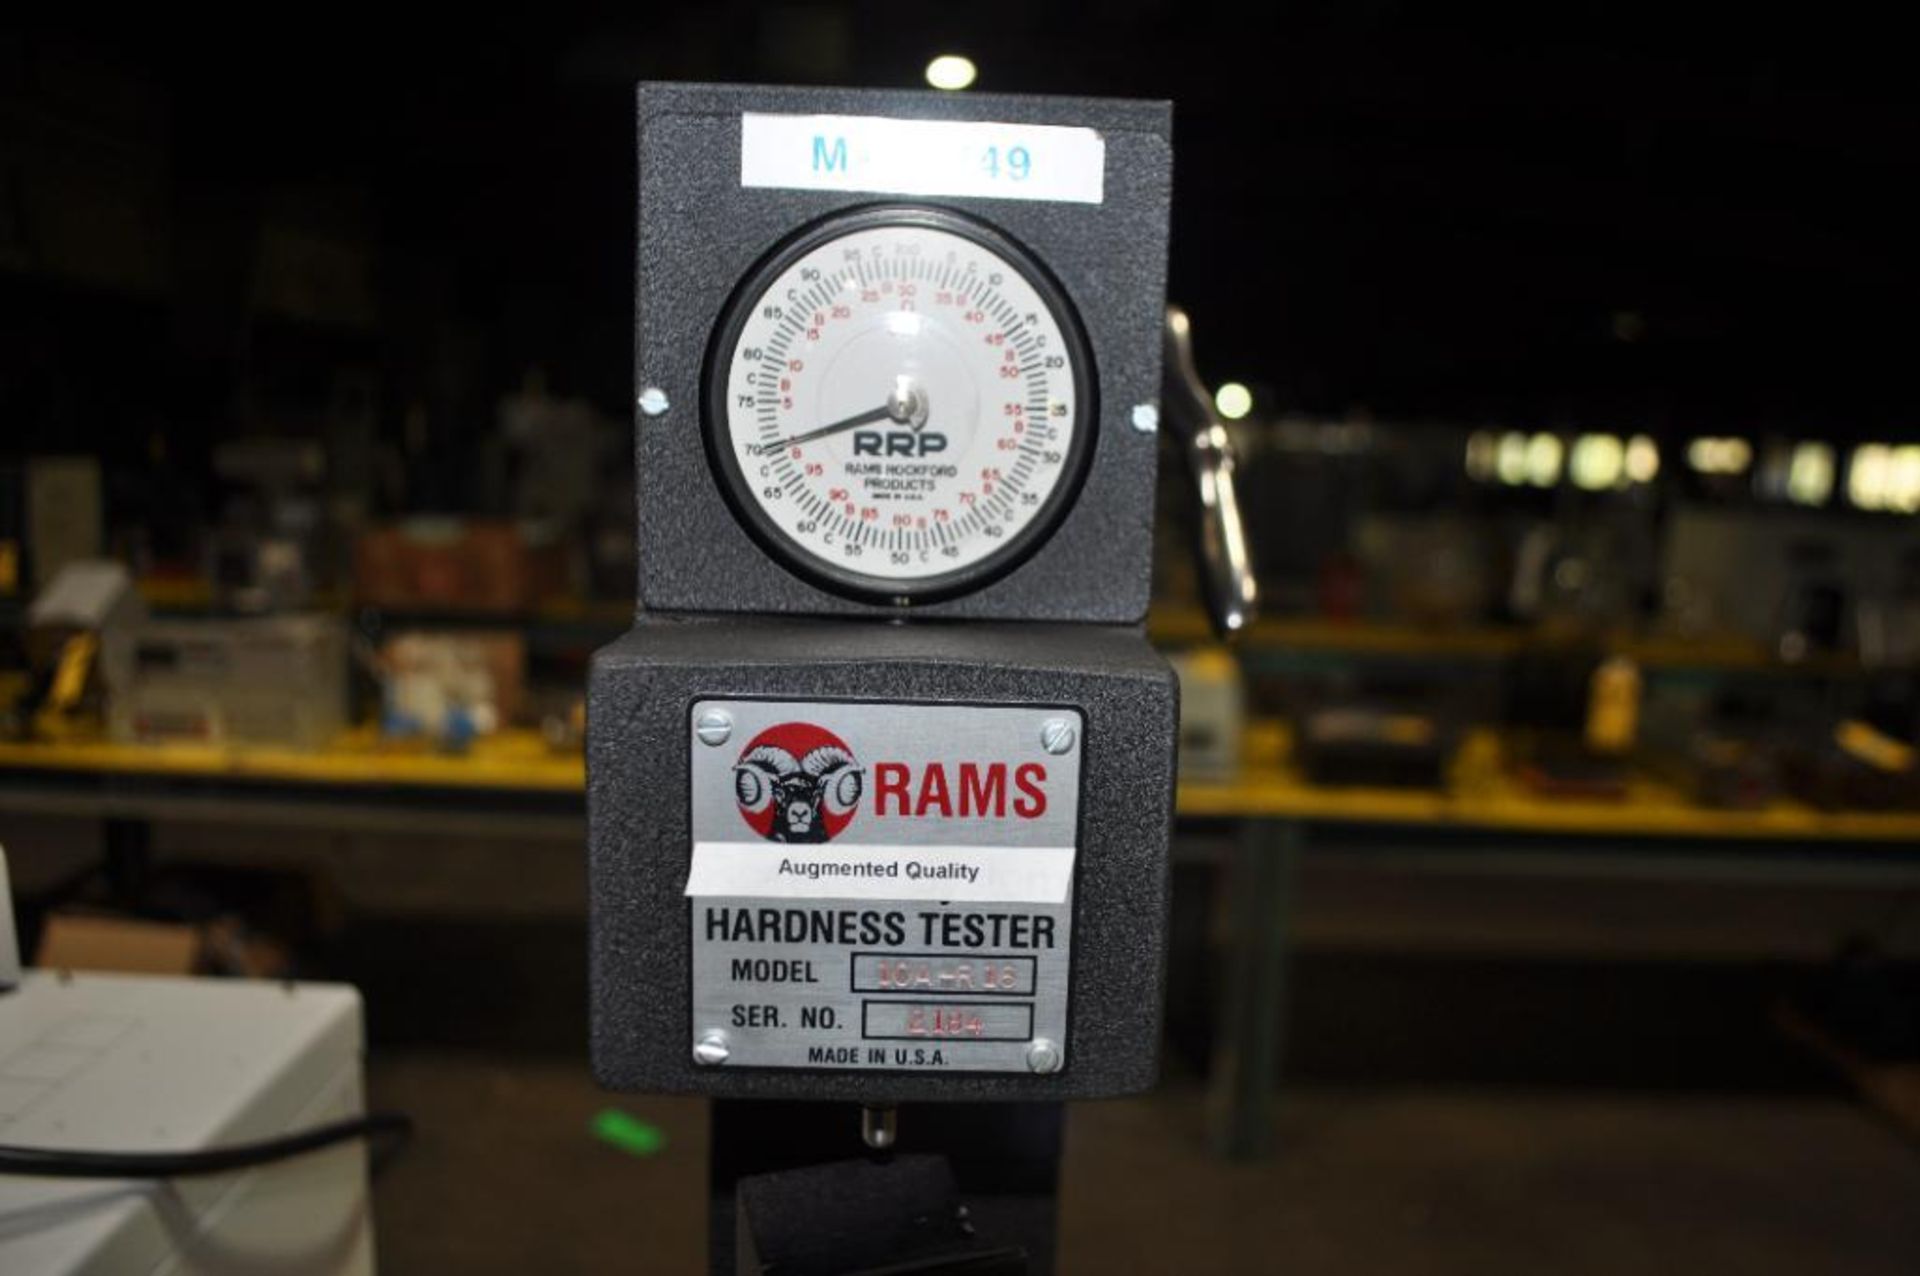 RAMS ROCKFORD PRODUCTS INC., HARDNESS TESTER, MODEL: 10A-R16 - Image 2 of 4